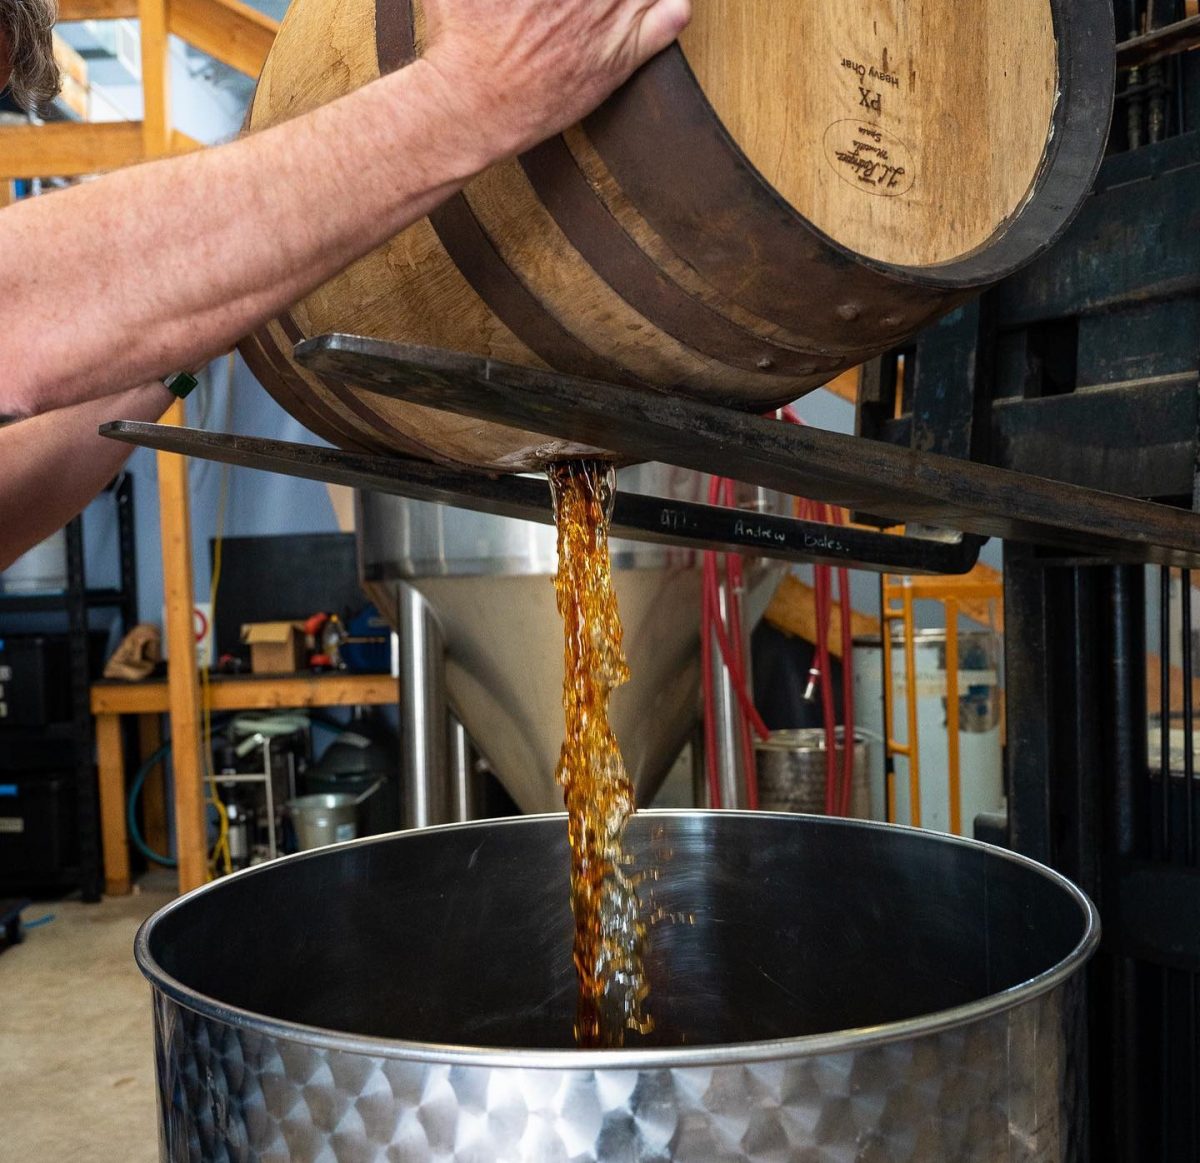 Whisky pouring from a barrel